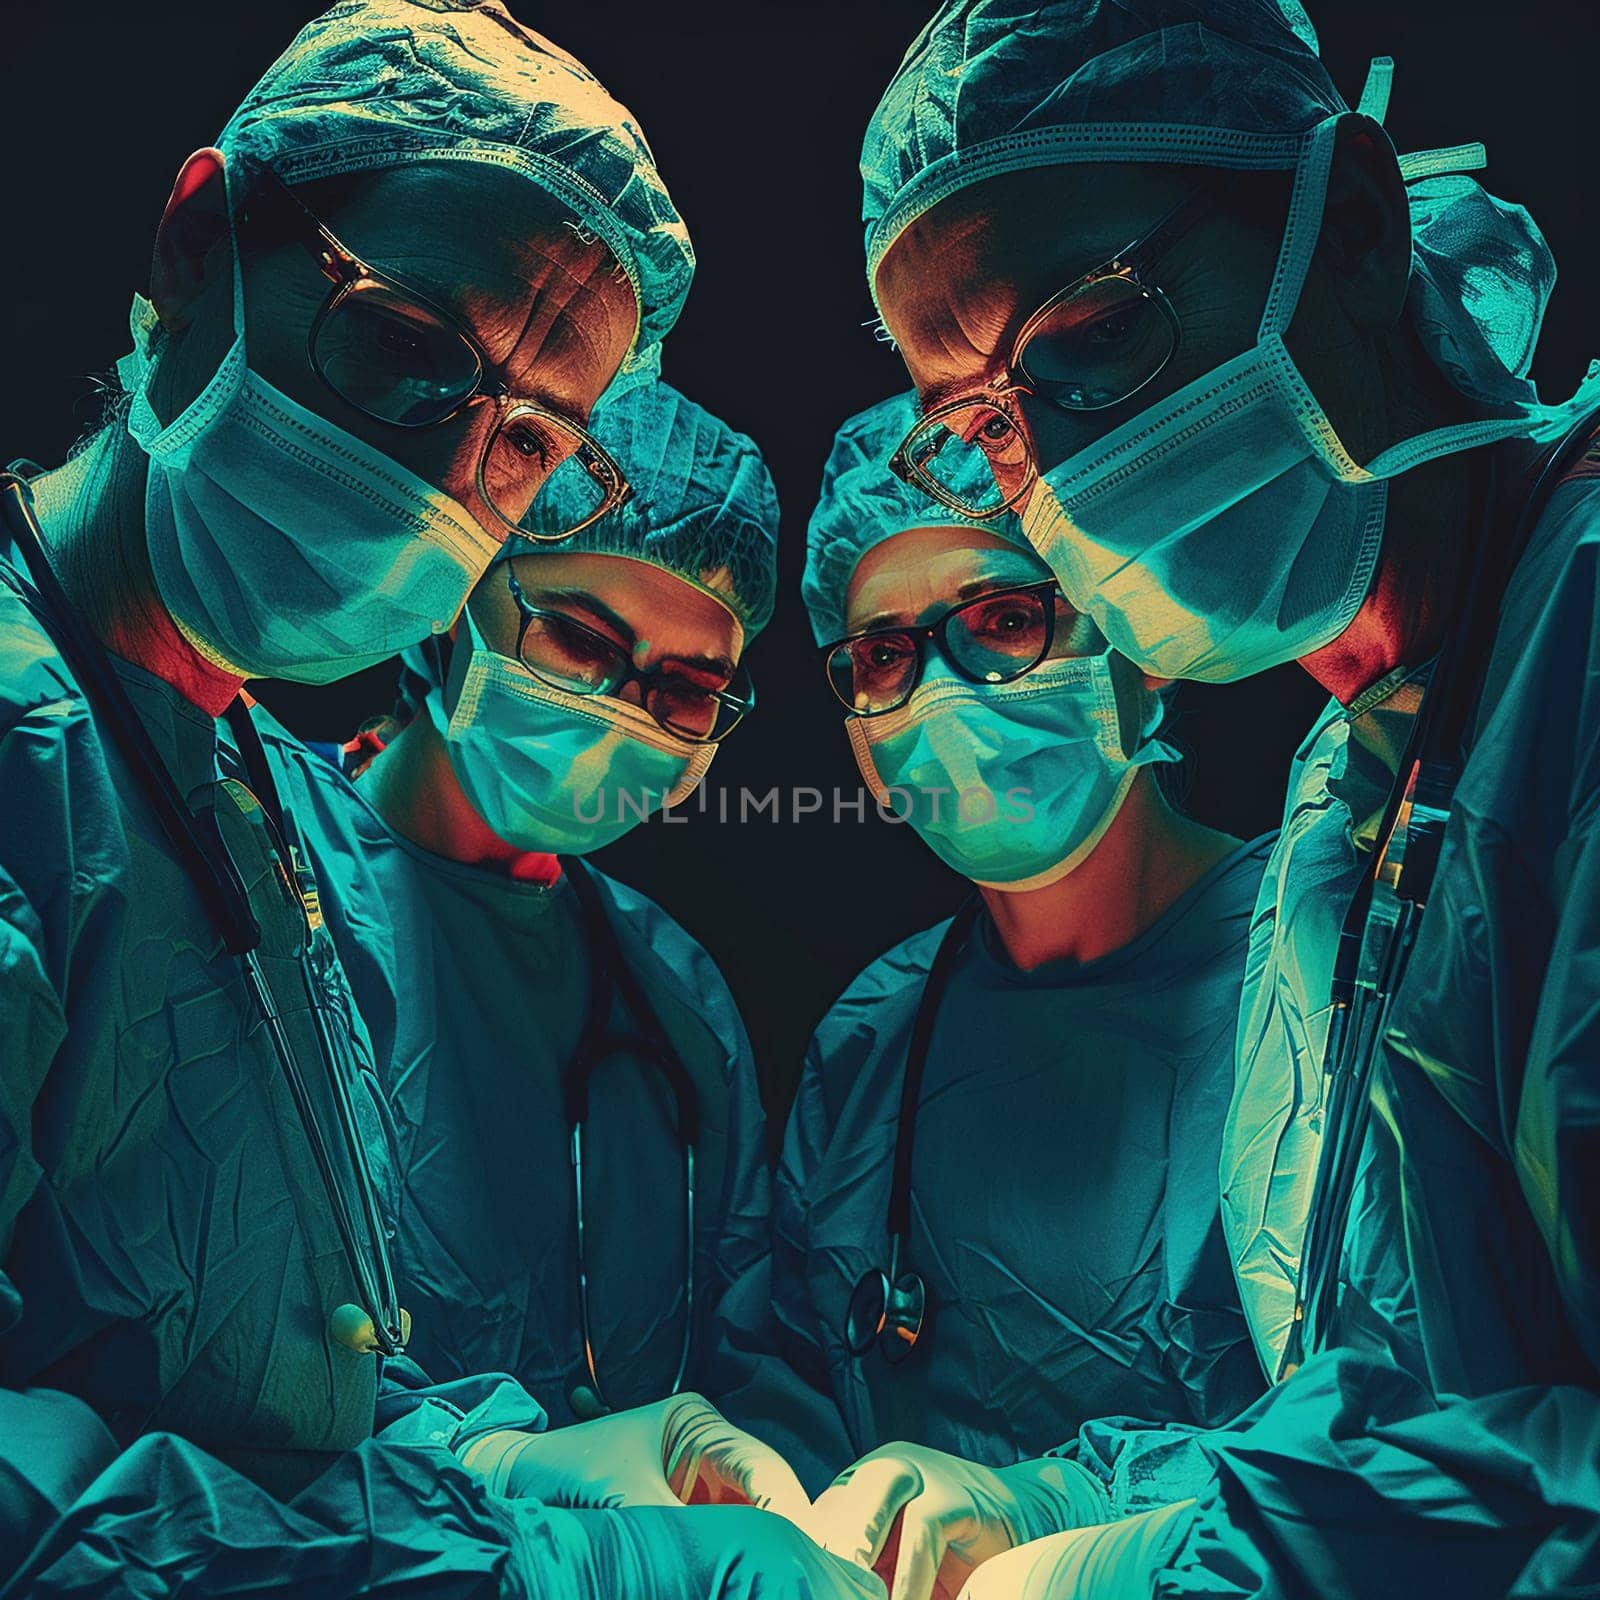 Powerful portrait of medical team in action, commemorating National Doctors Day.